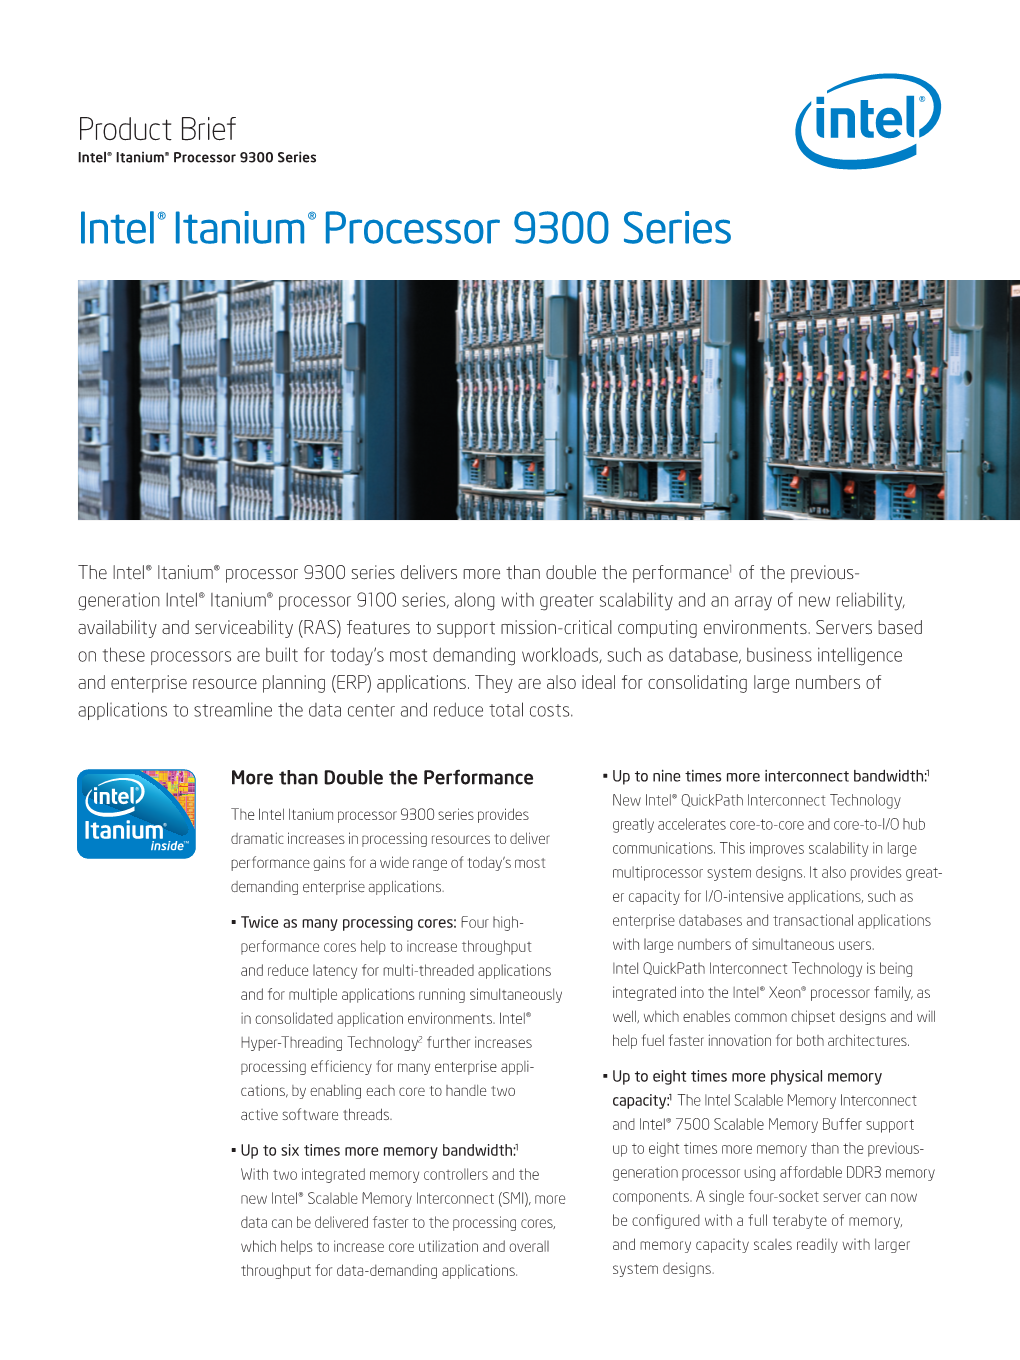 Intel Itanium Processor 9300 Series Provides Greatly Accelerates Core-To-Core and Core-To-I/O Hub Dramatic Increases in Processing Resources to Deliver Communications